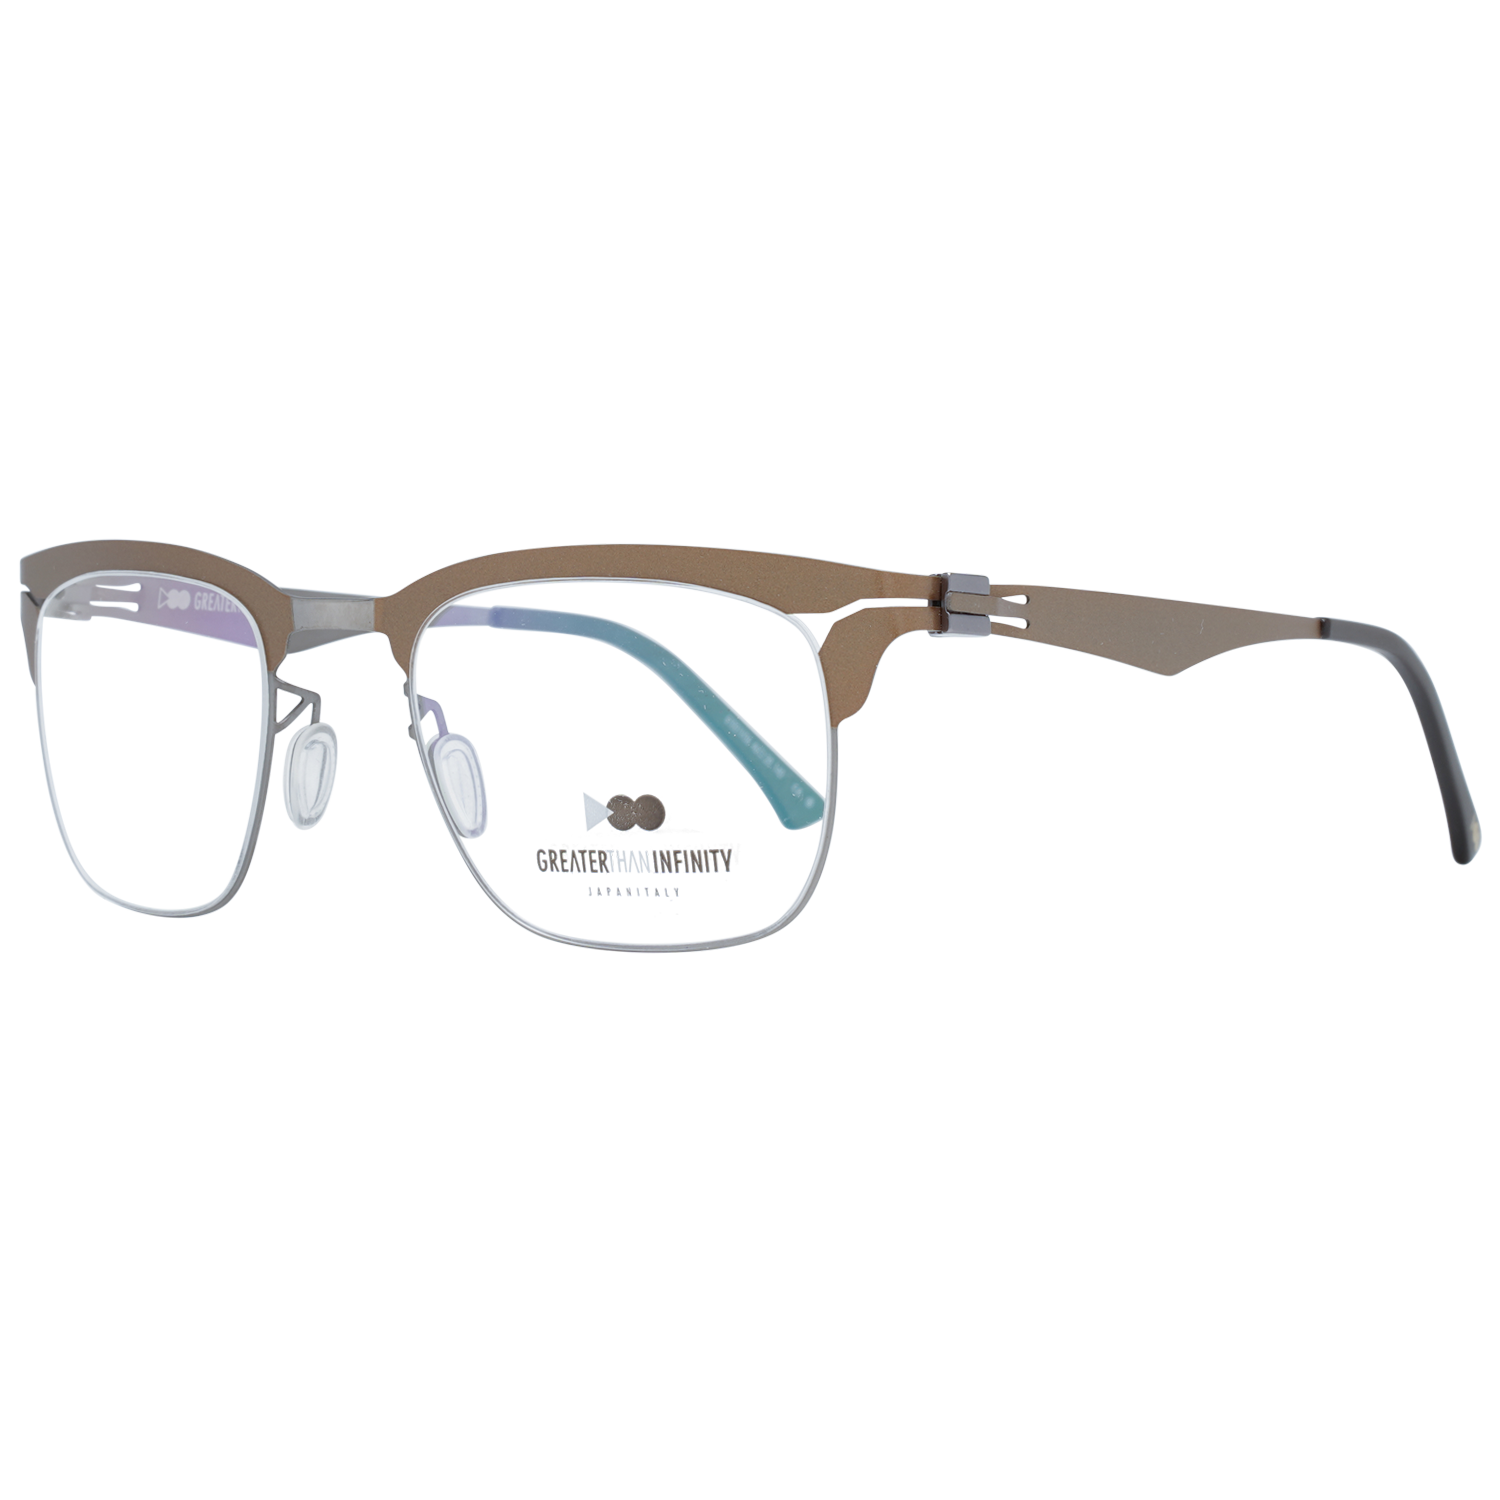 Greater Than Infinity Optical Frame GT001 V06 46 Brown